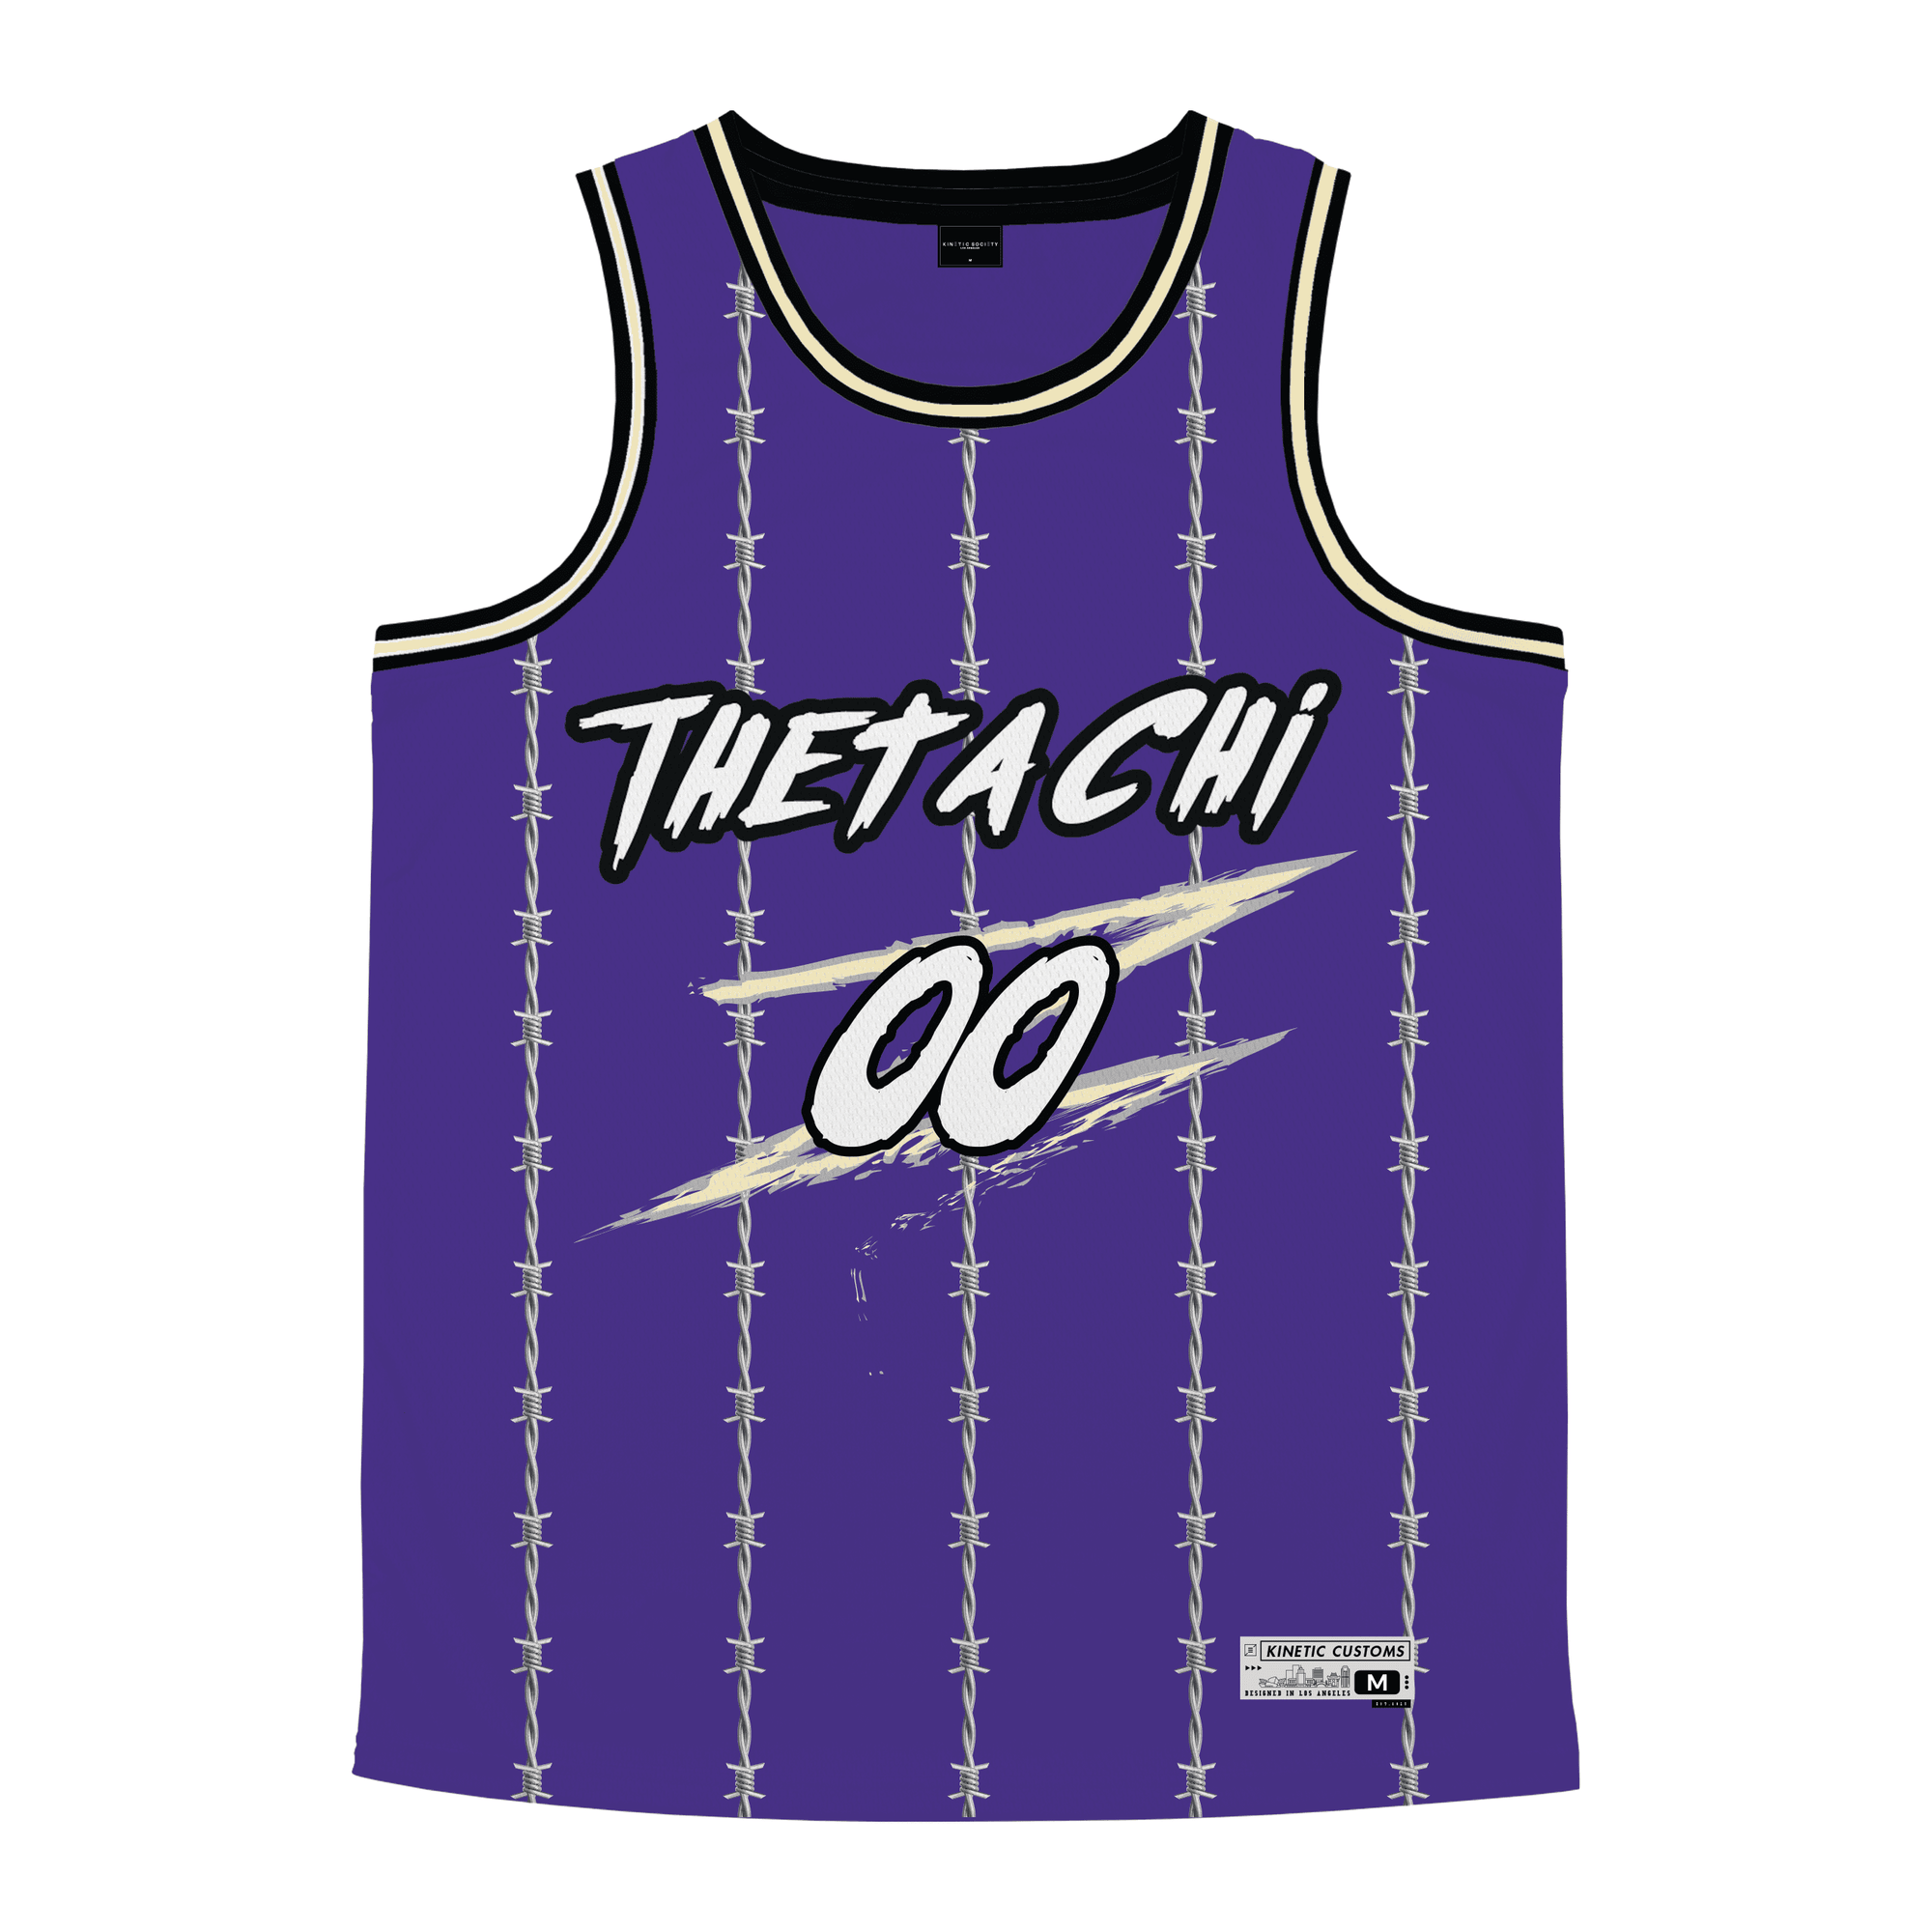 Theta Chi - Barbed Wire Basketball Jersey